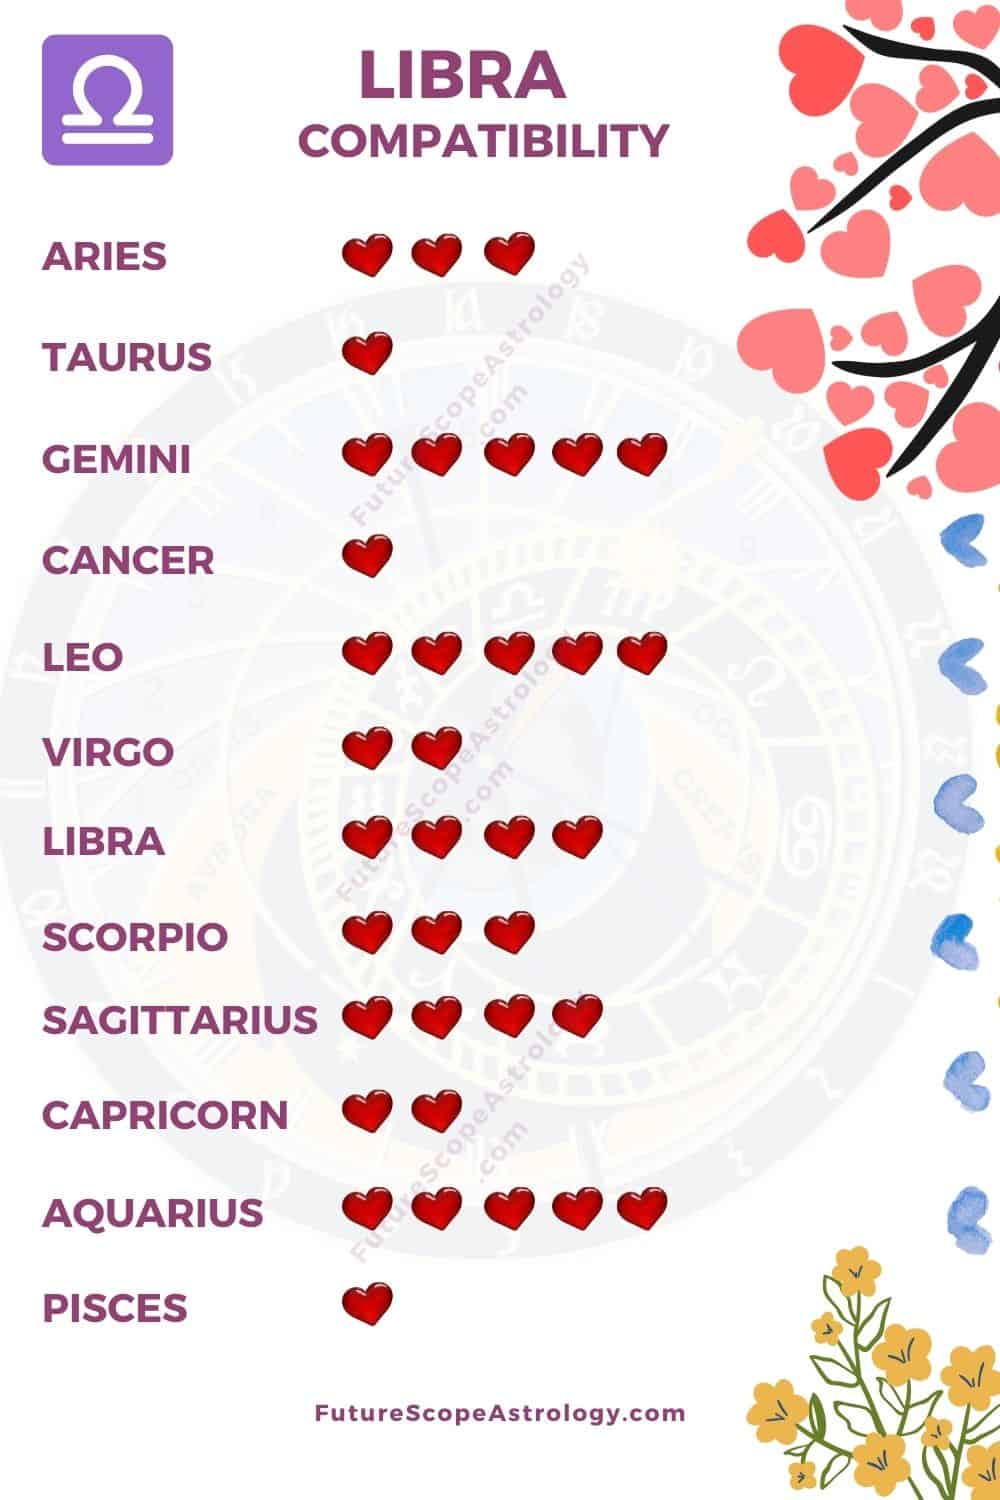 Who is Libra compatible with in a relationship?